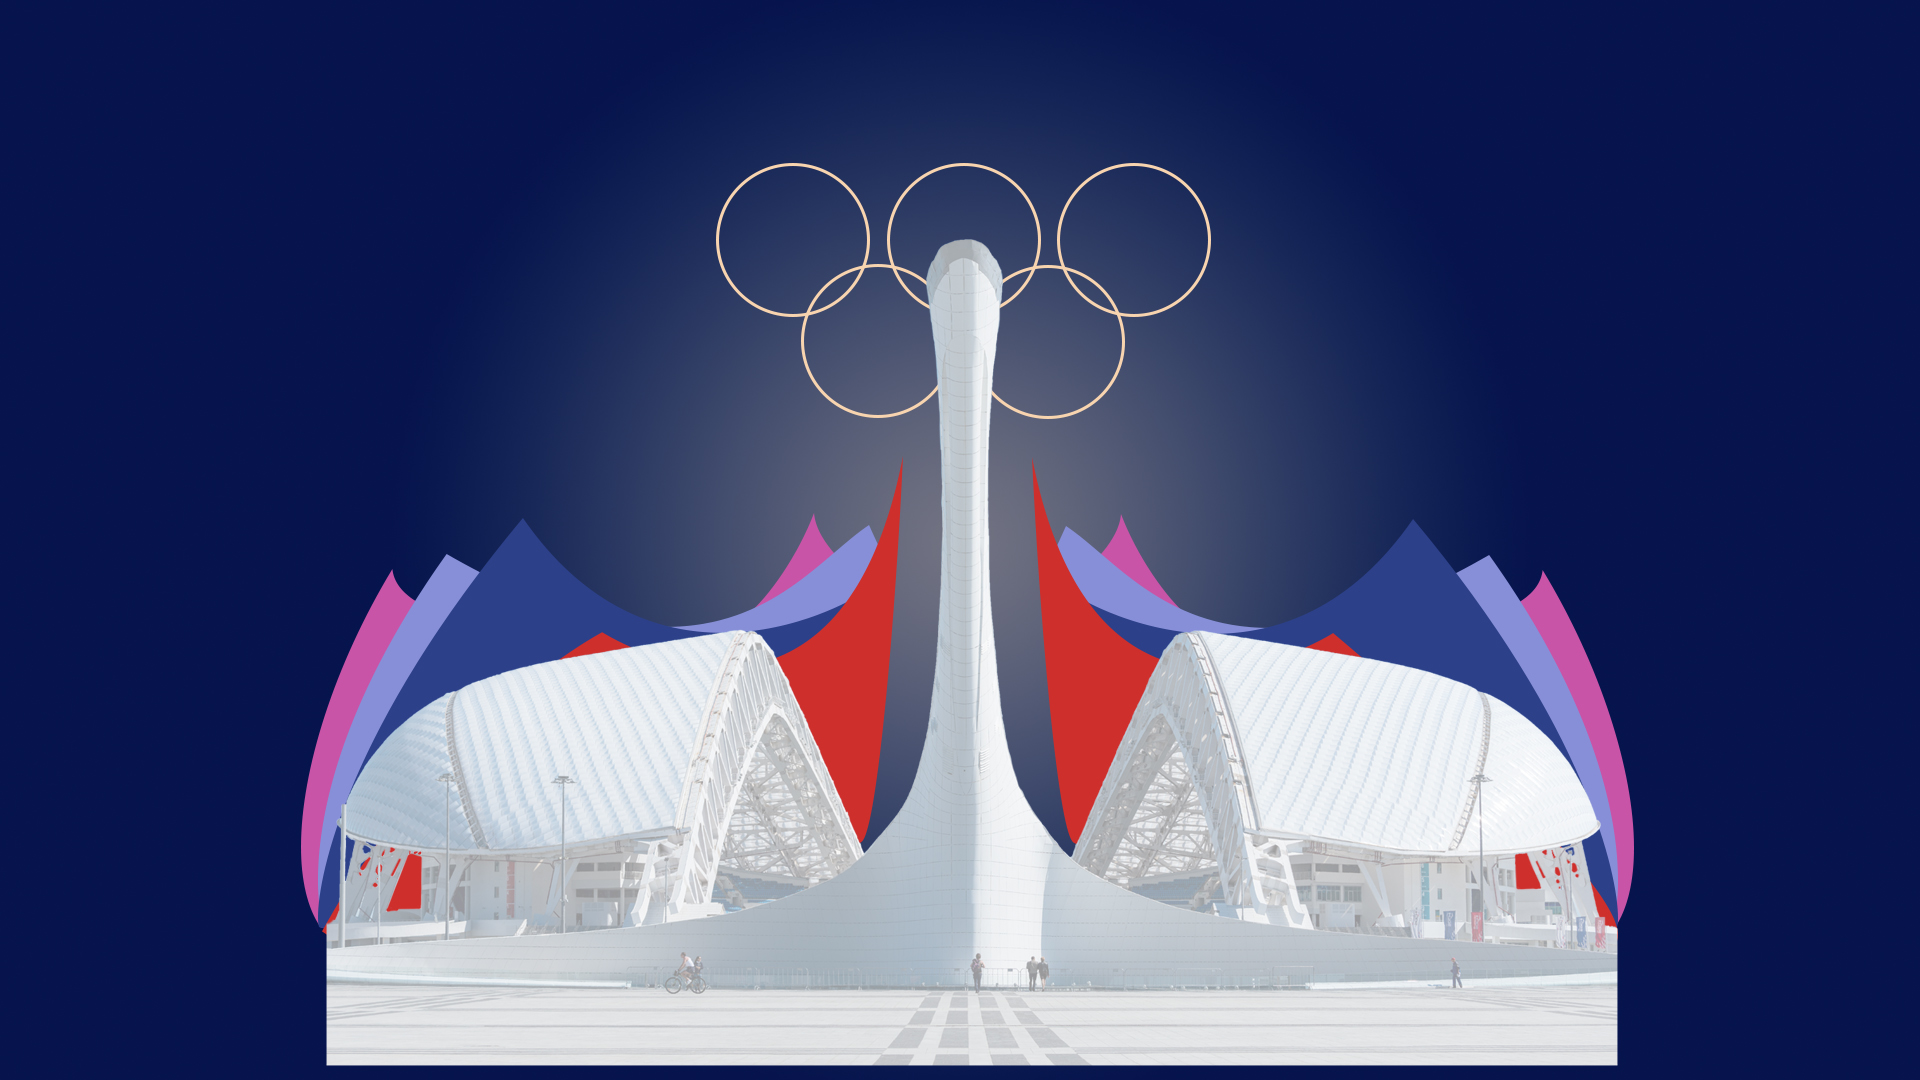 Sochi Fisht stadium sits in front of pointed shapes  and olympics rings on blue background